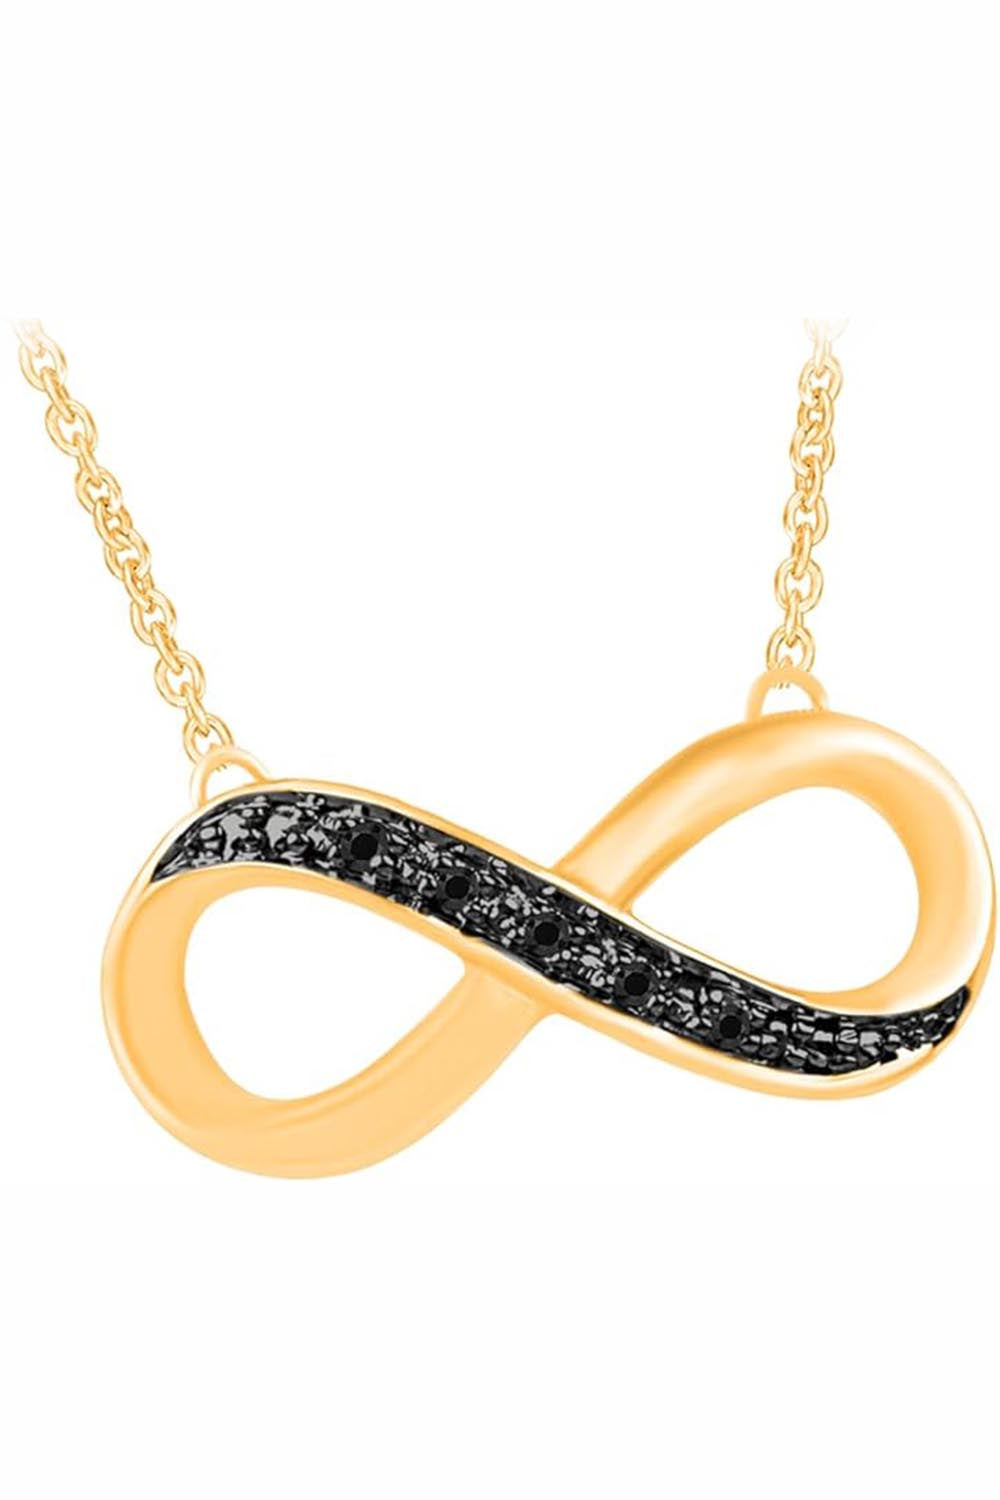 Yellow Gold Color Yaathi Black Infinity Necklace, Pendant for Women 